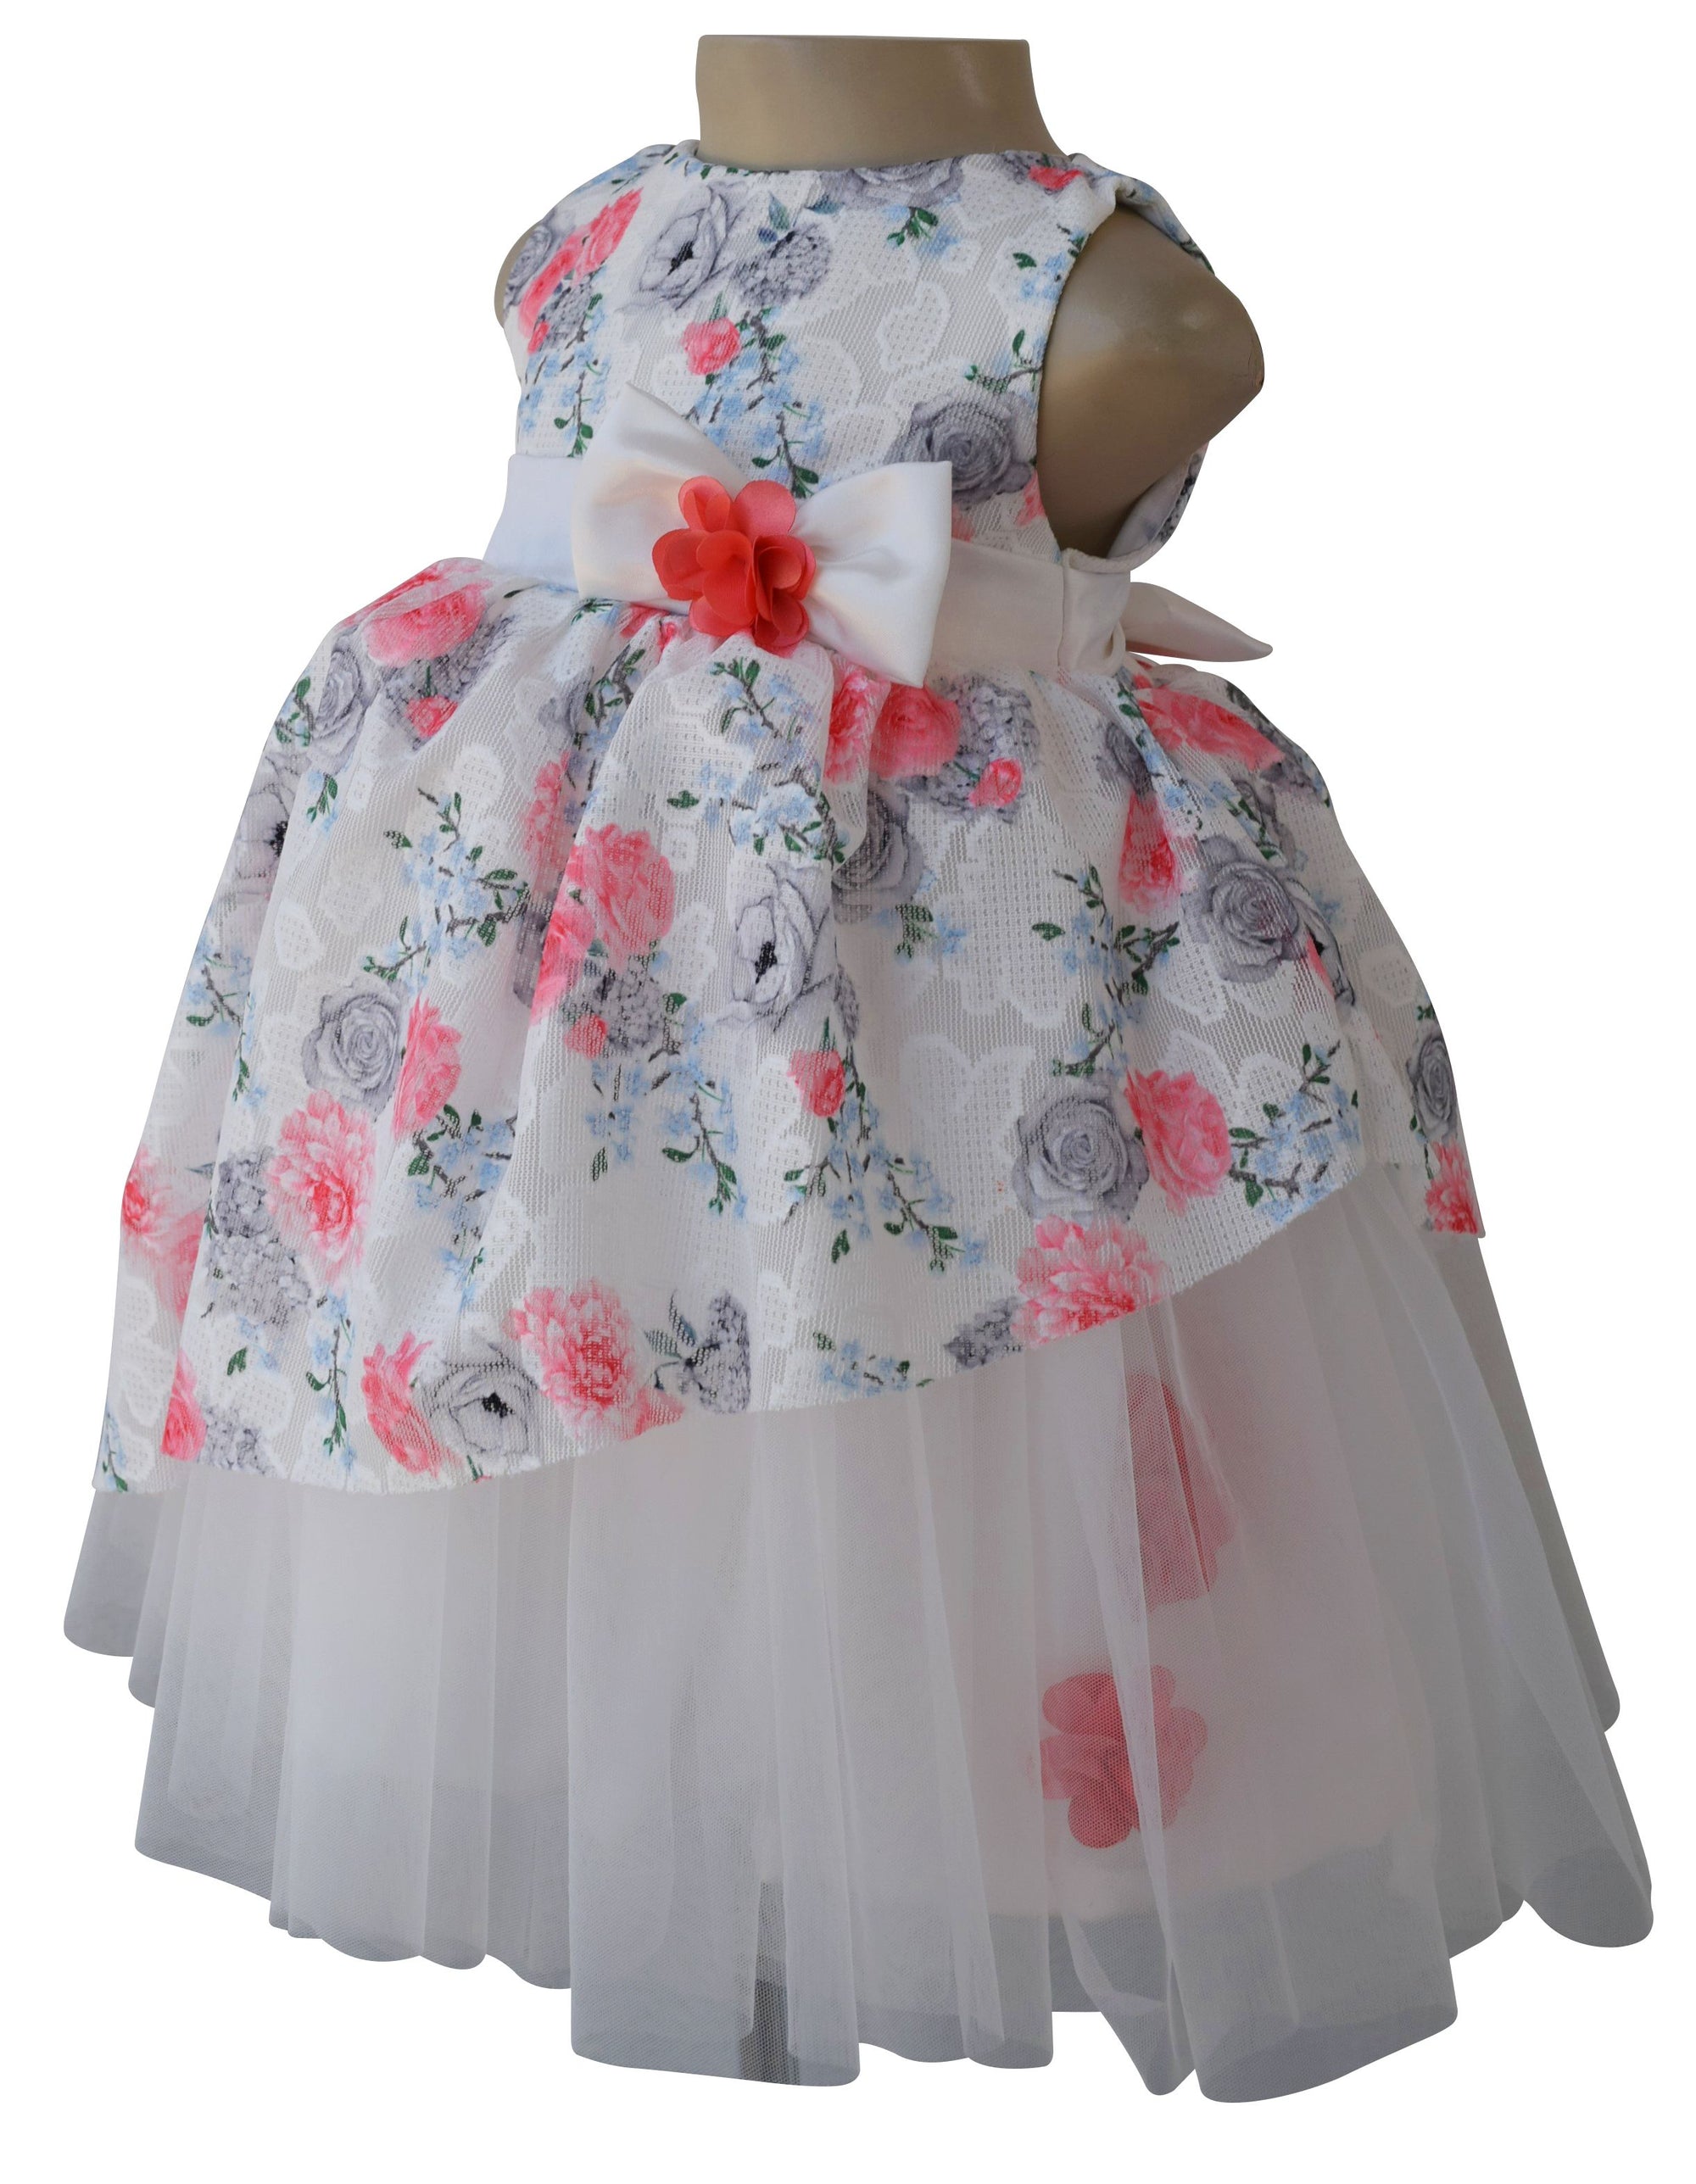 Dress for Girls_Faye Cherry Floral Party Dress